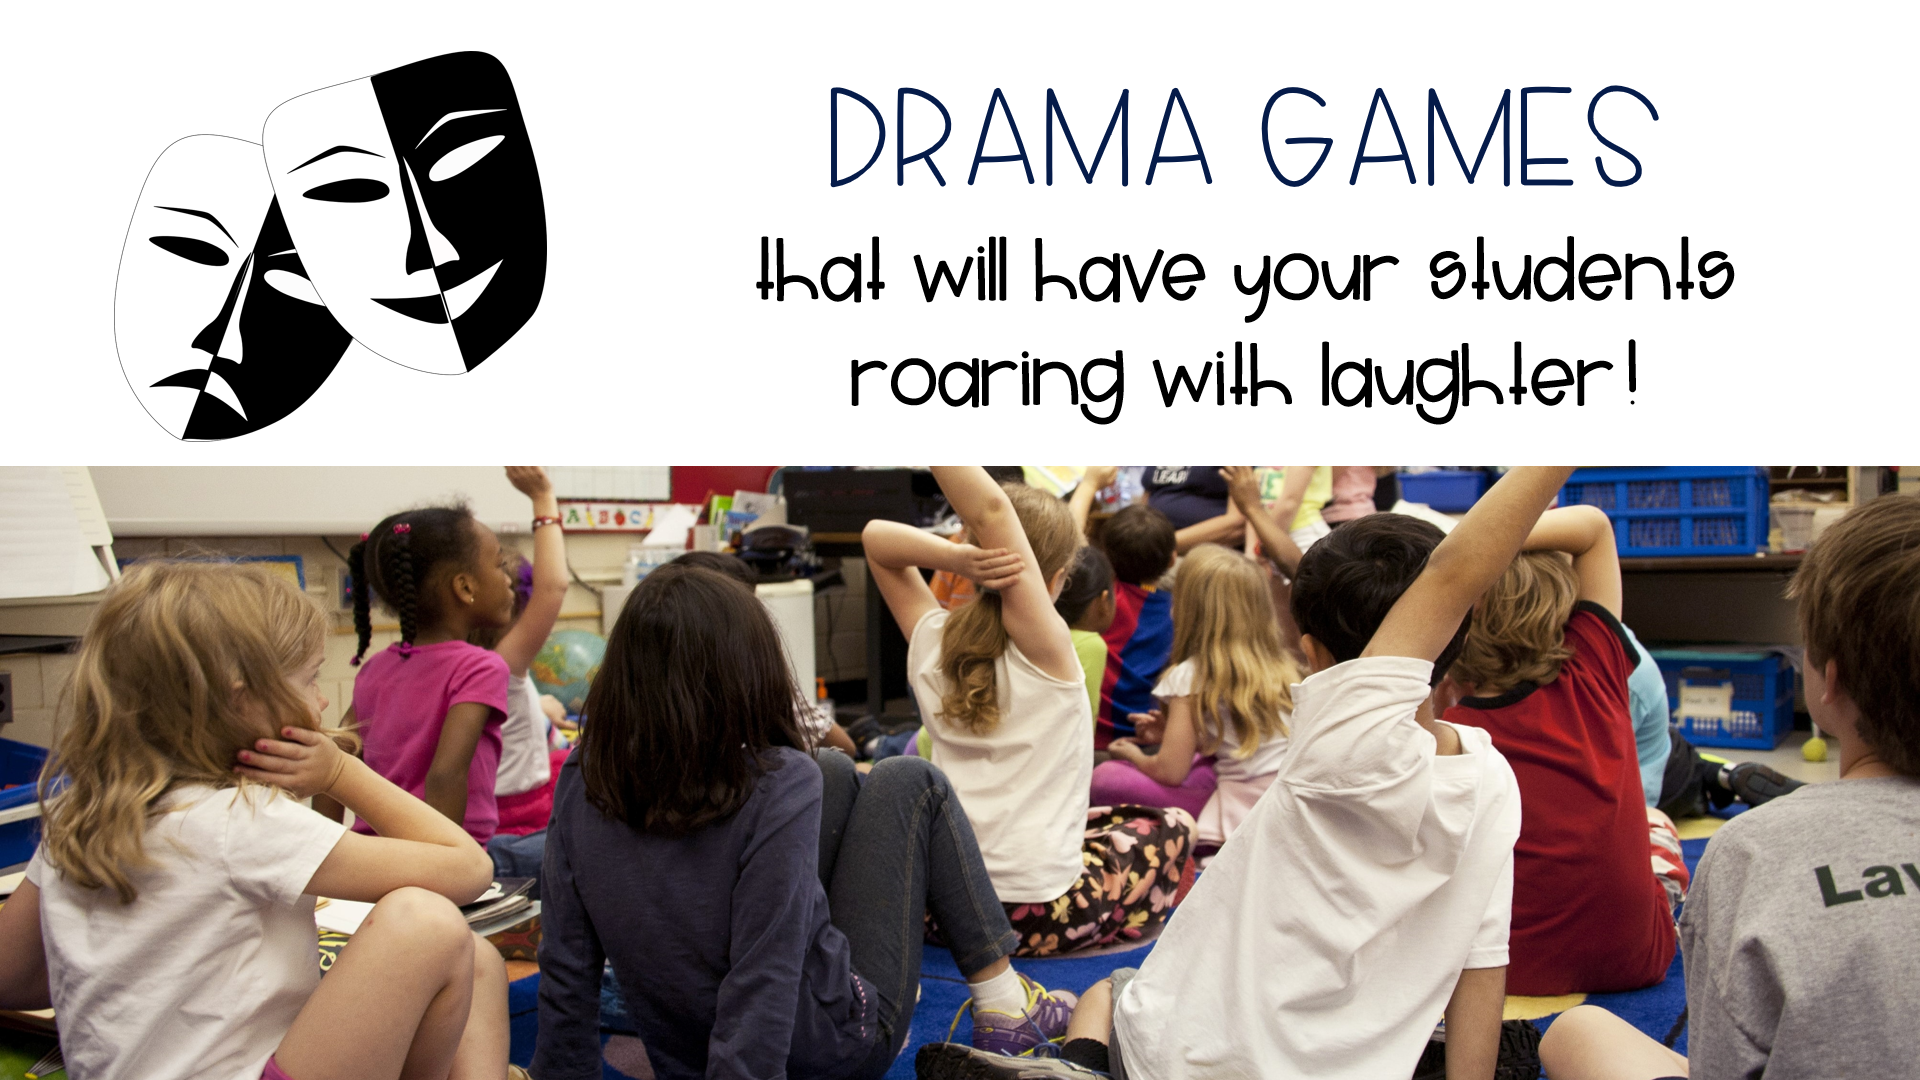 Drama games that will have your students roaring with laughter